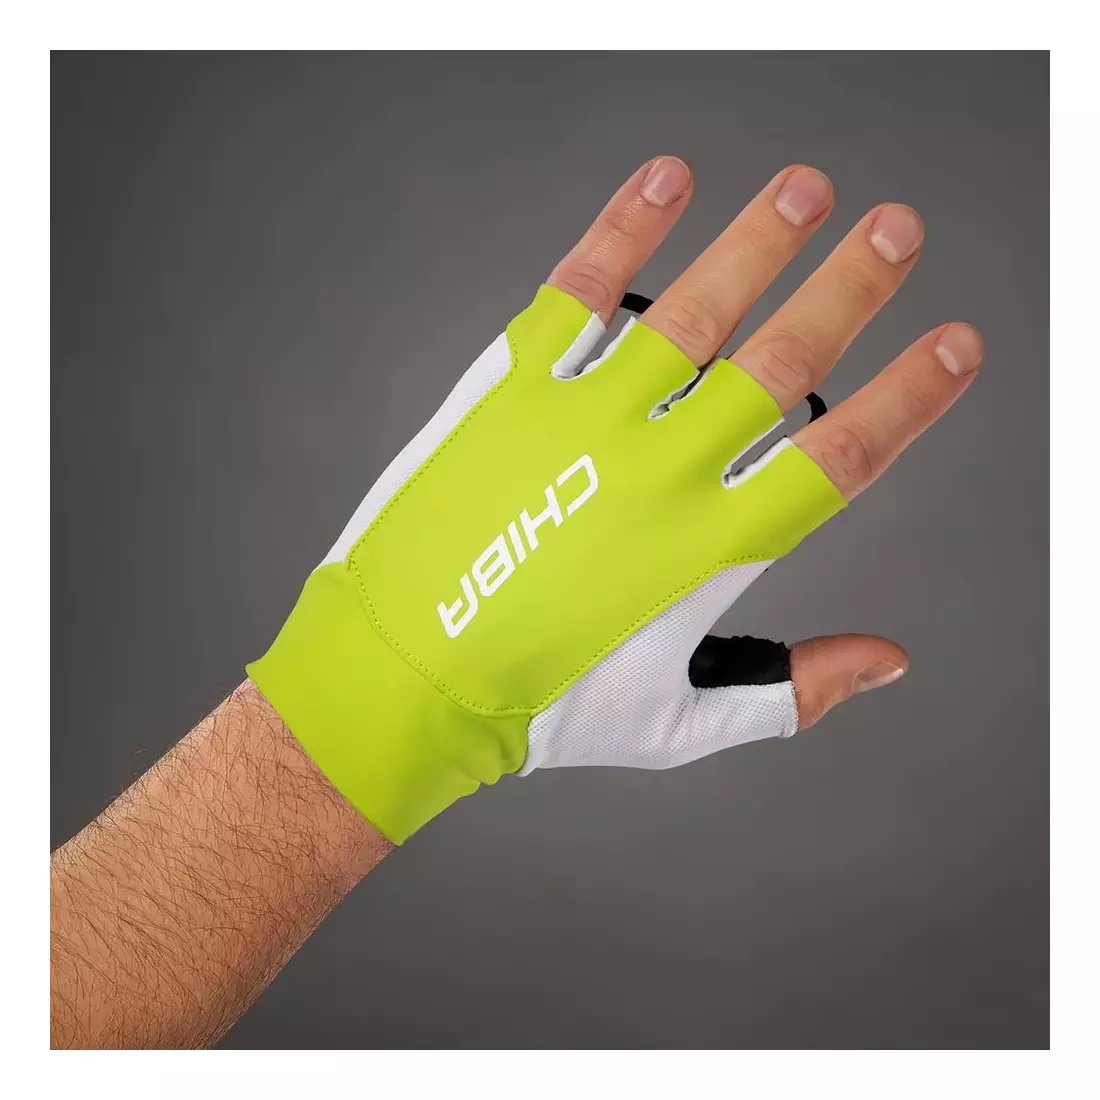 CHIBA MISTRAL road cycling gloves, green 3030420